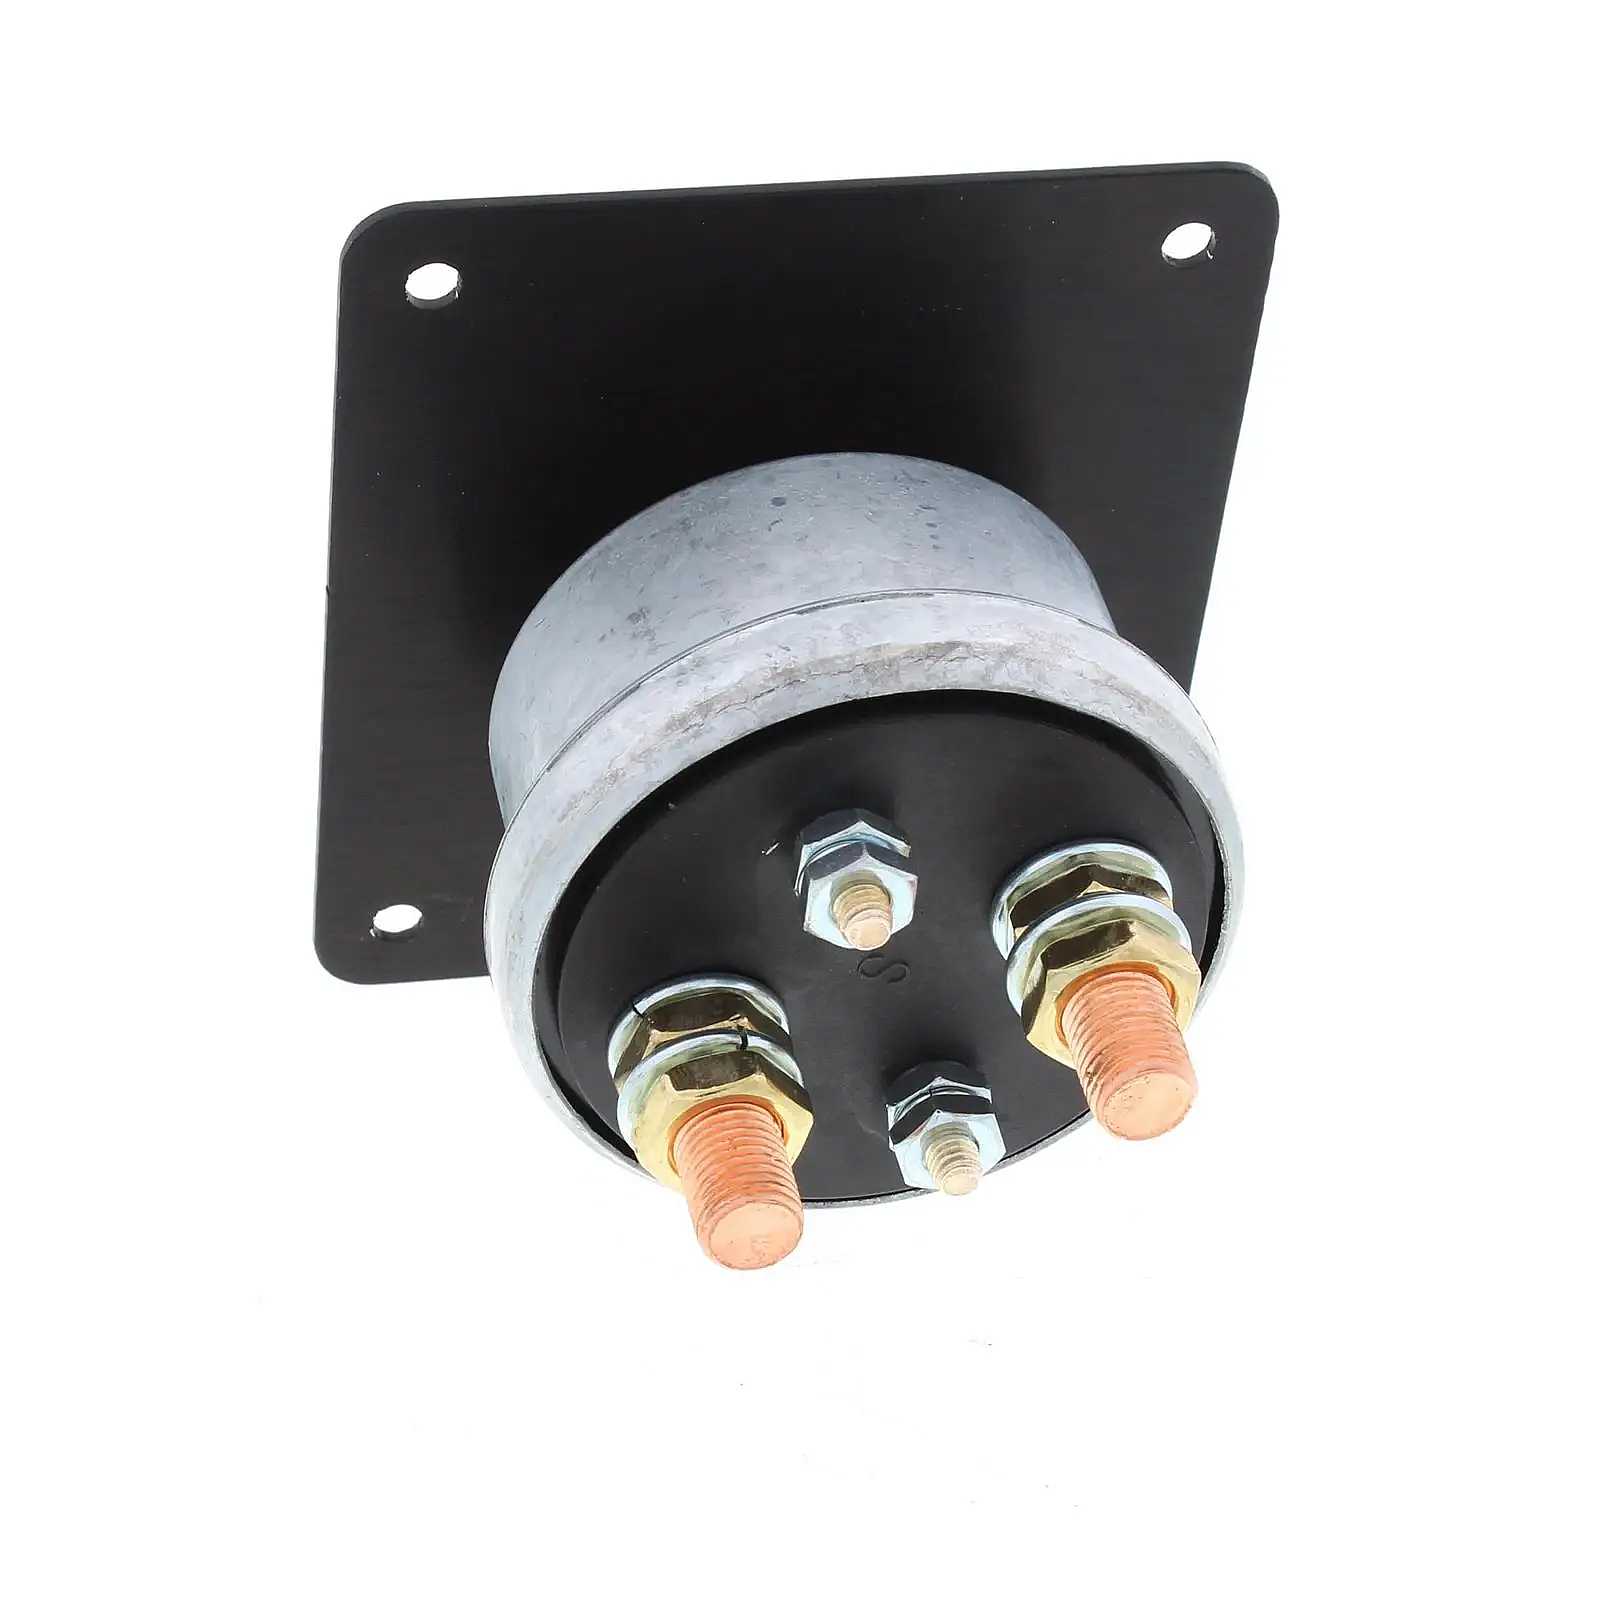 Manual battery disconect switch - 4 Terminal